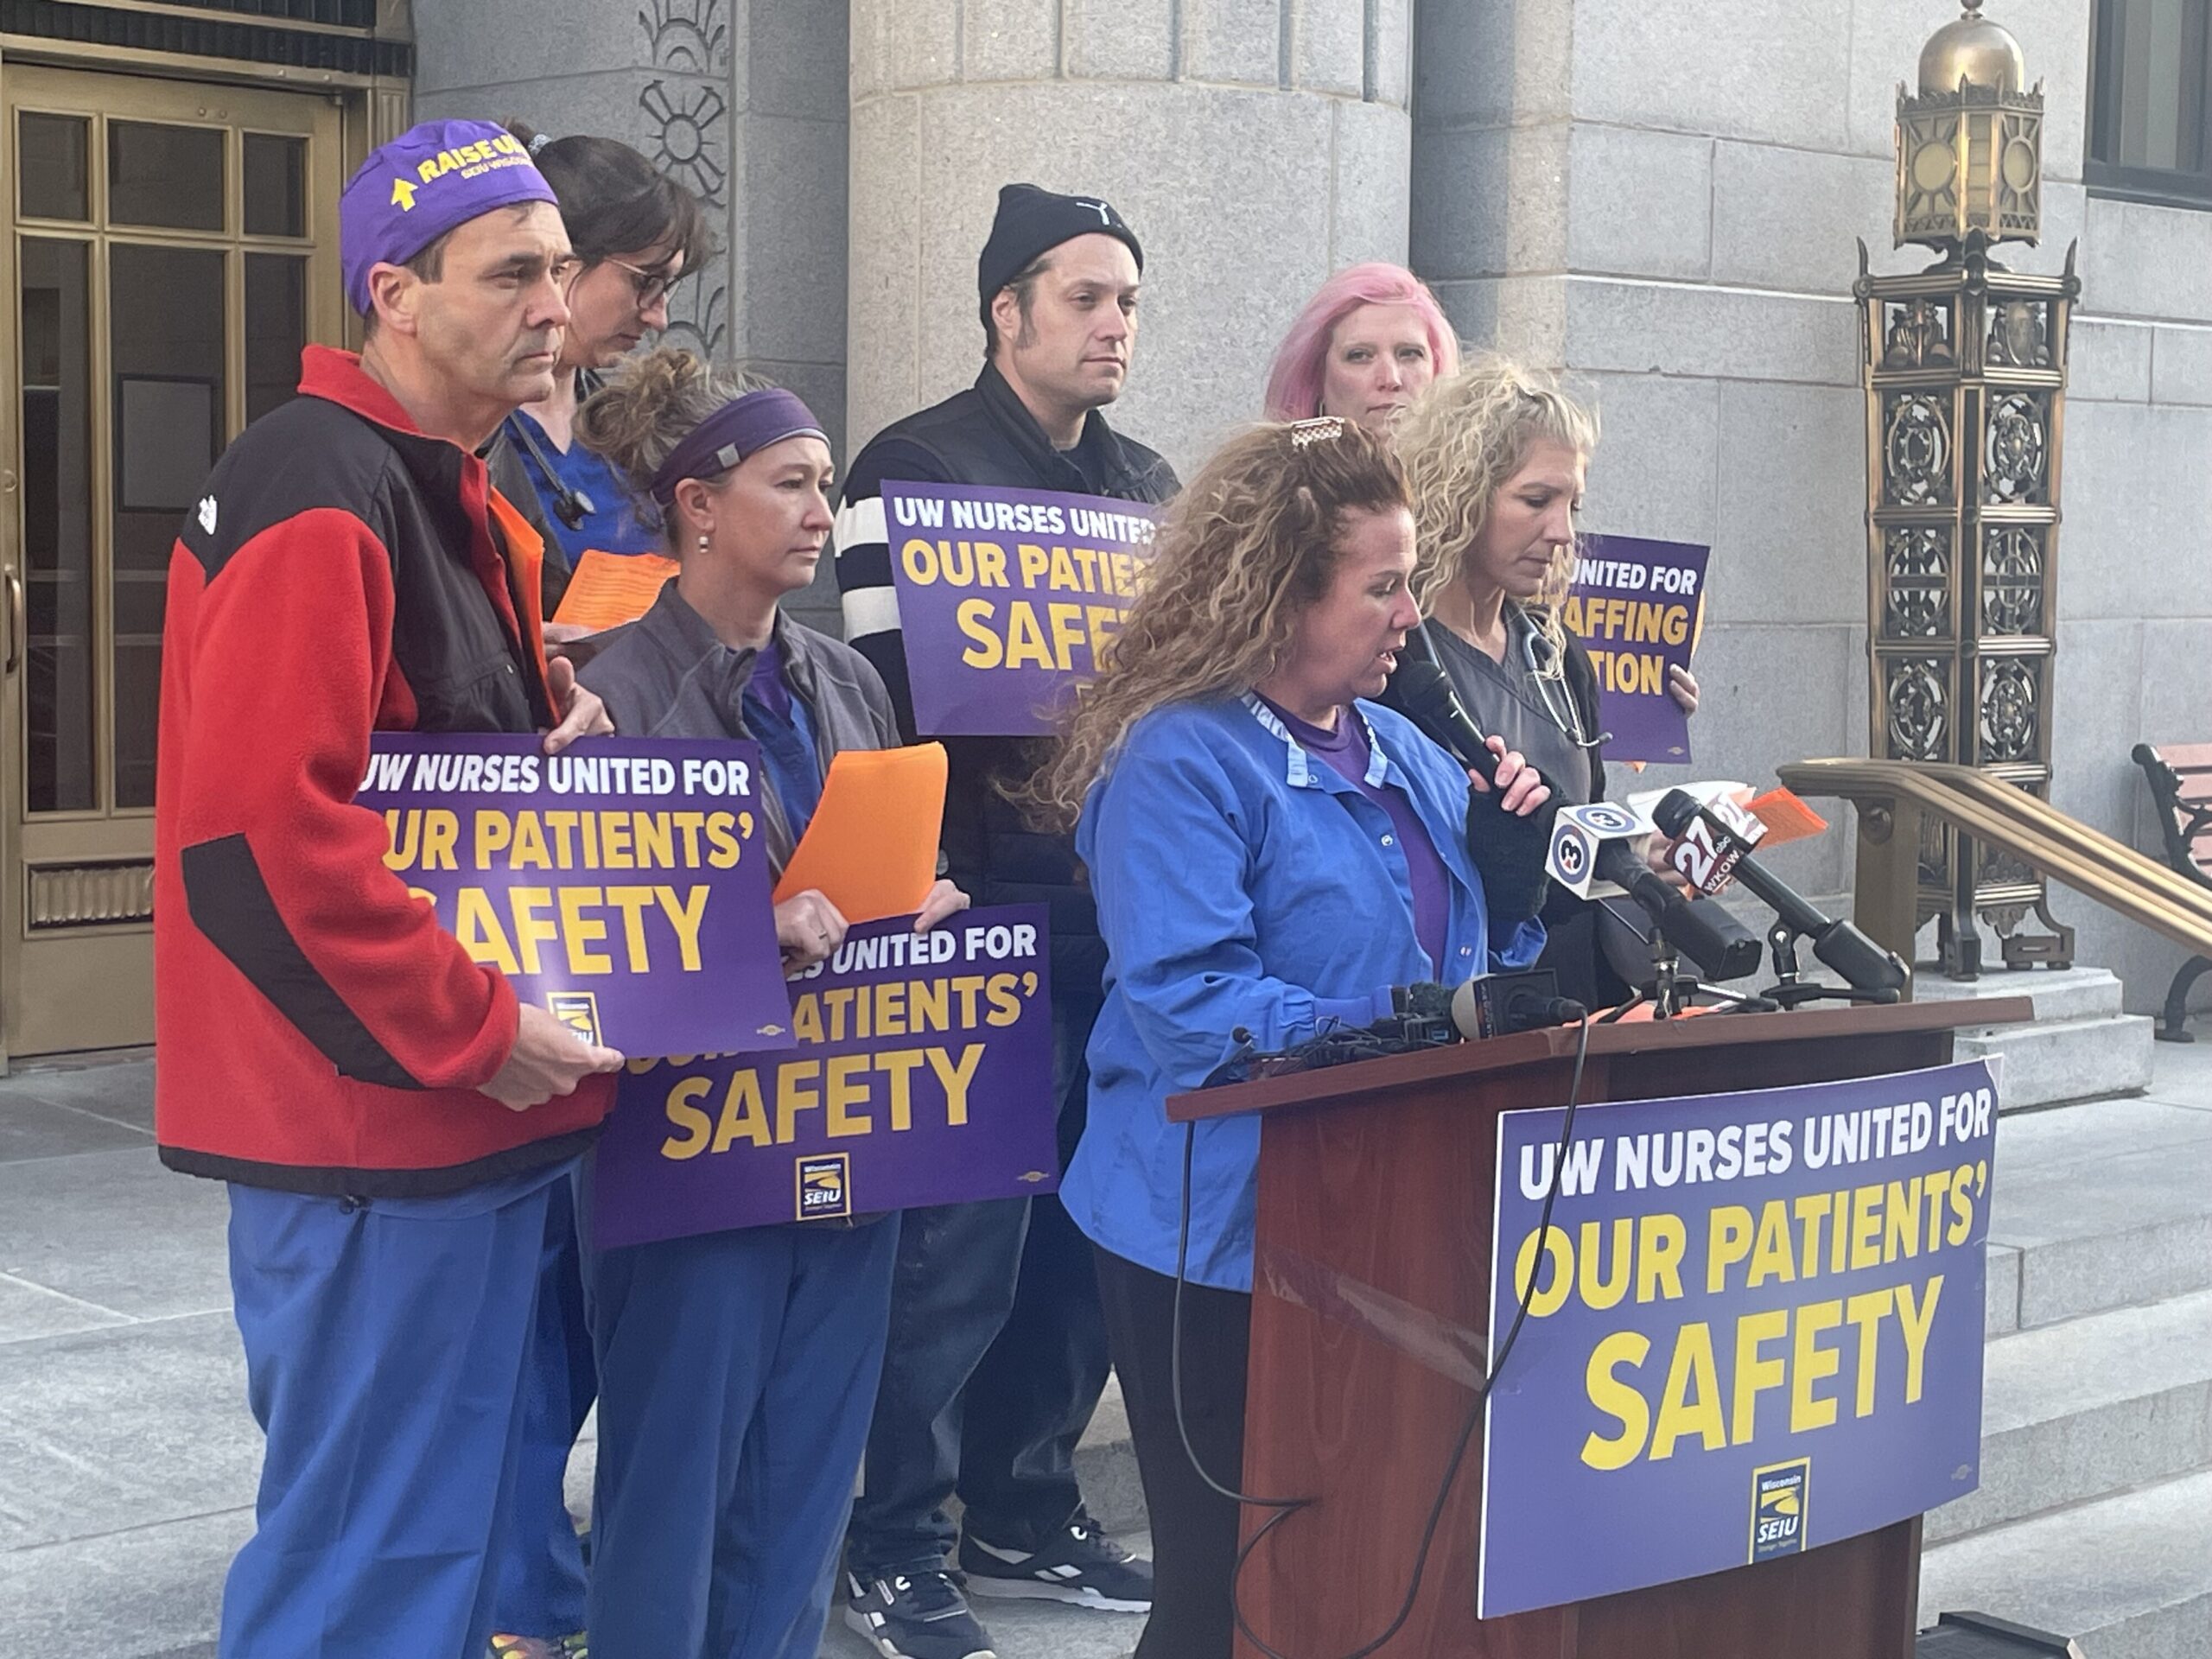 UW Health nurses reporting safety concerns to state amid labor dispute